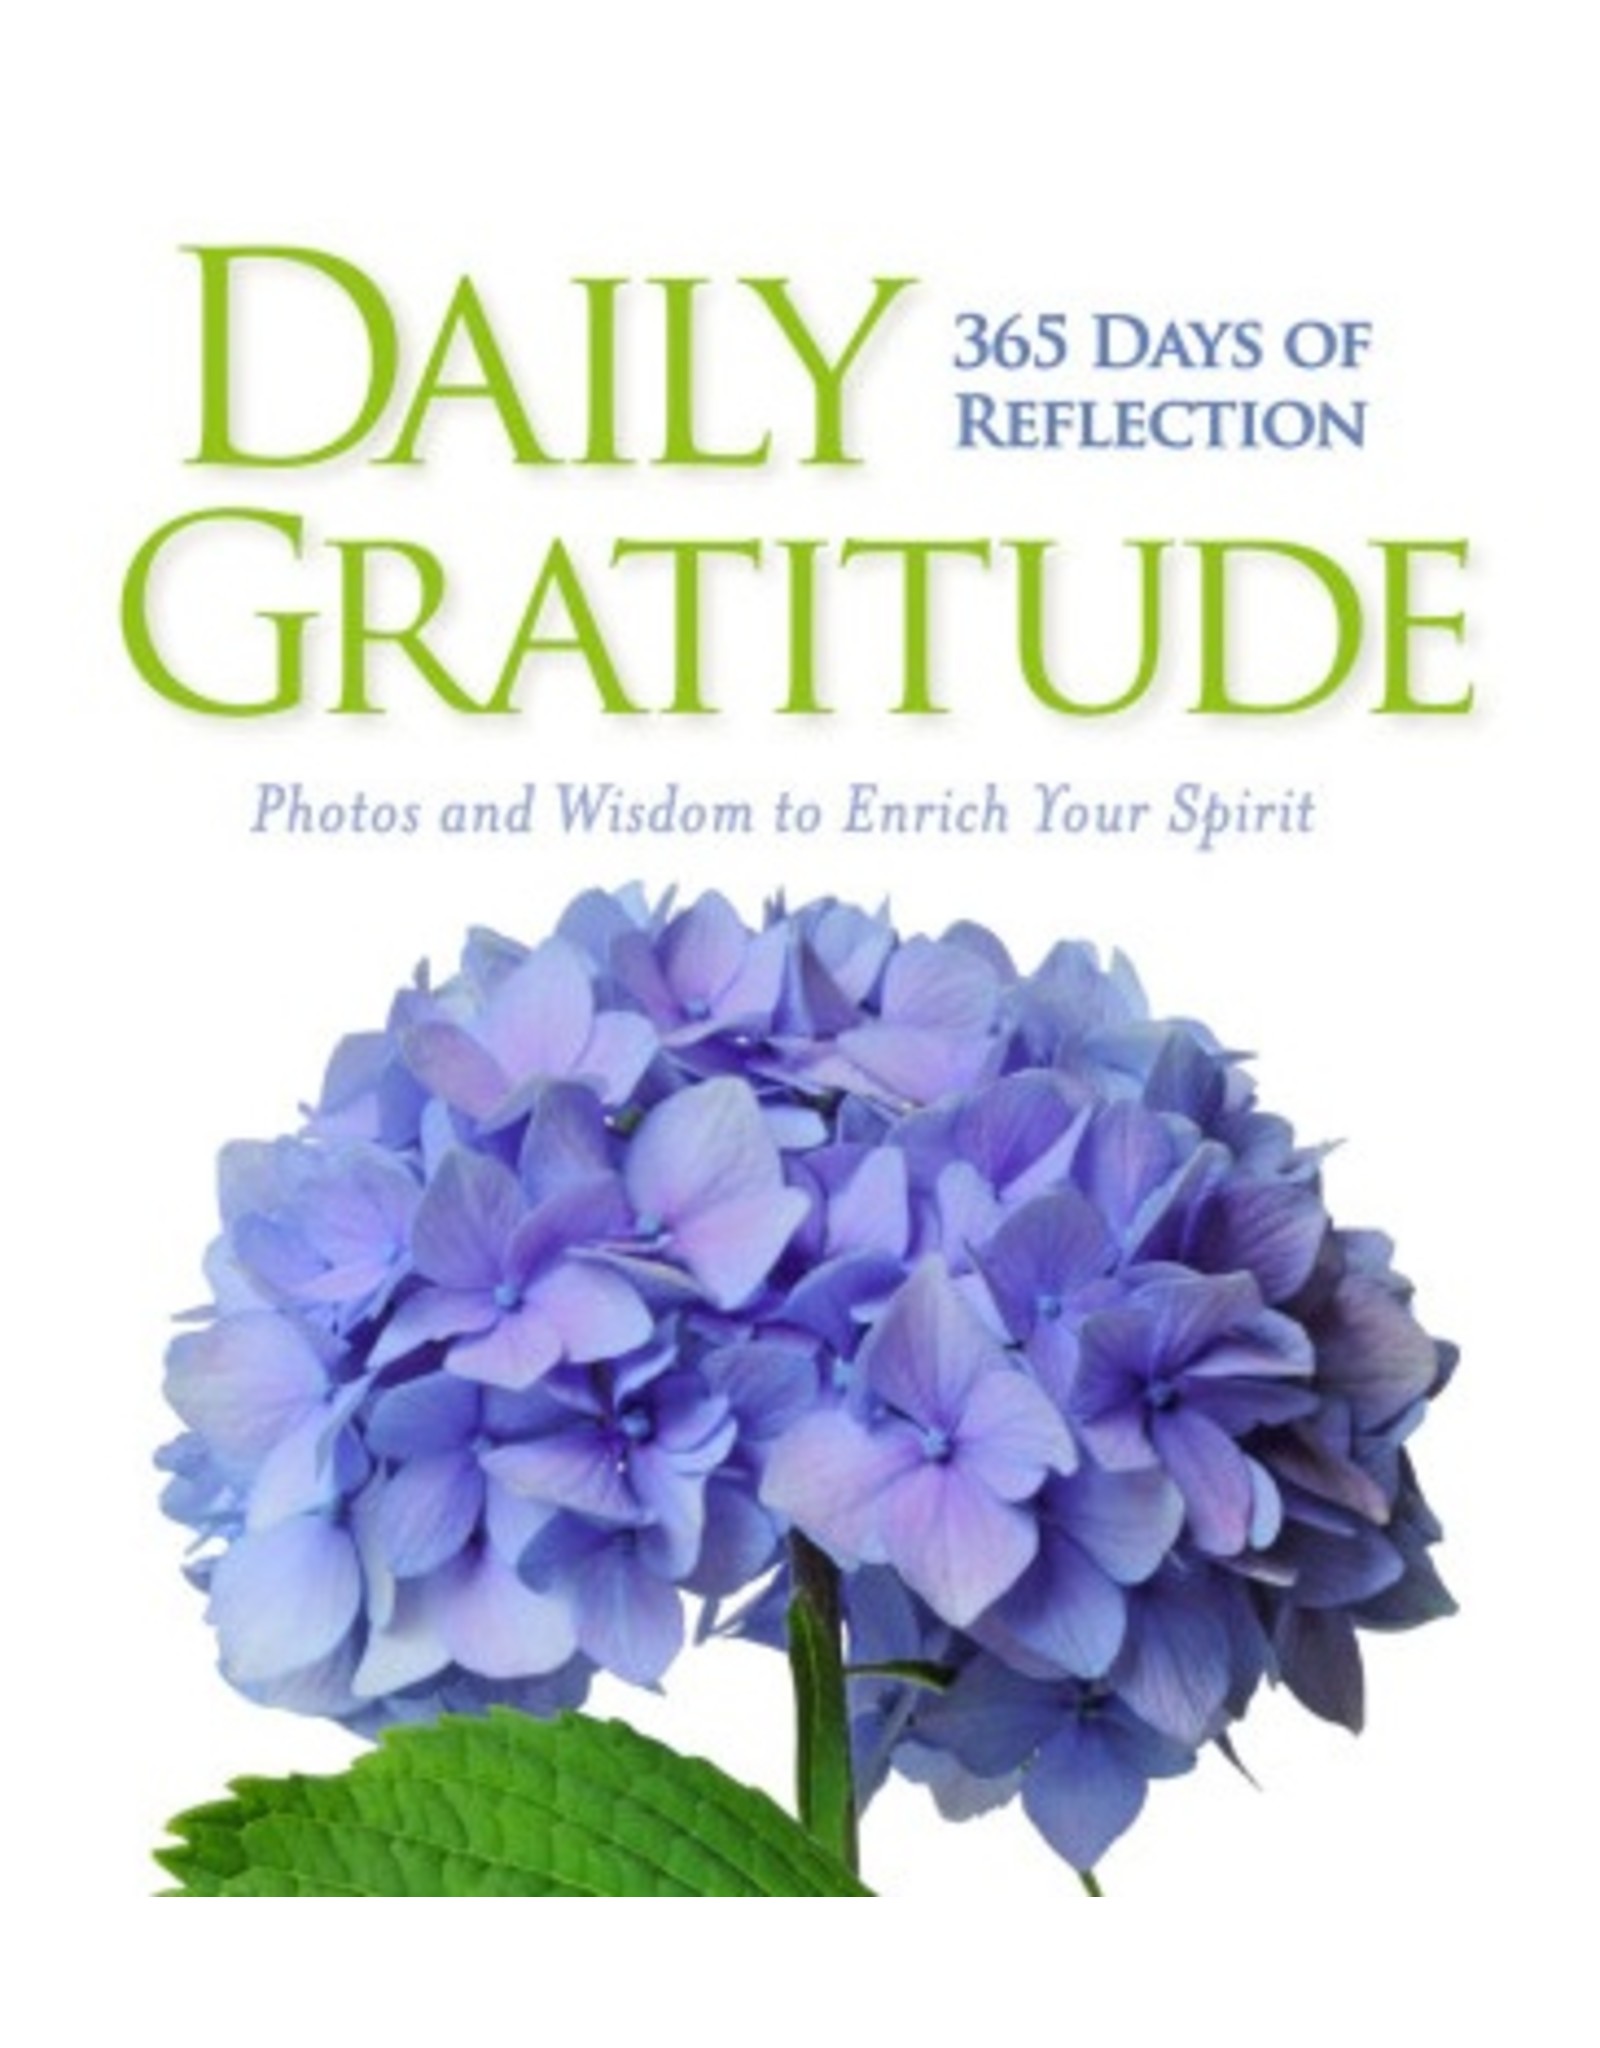 Trade roots Daily Gratitude: 365 Days of Reflection